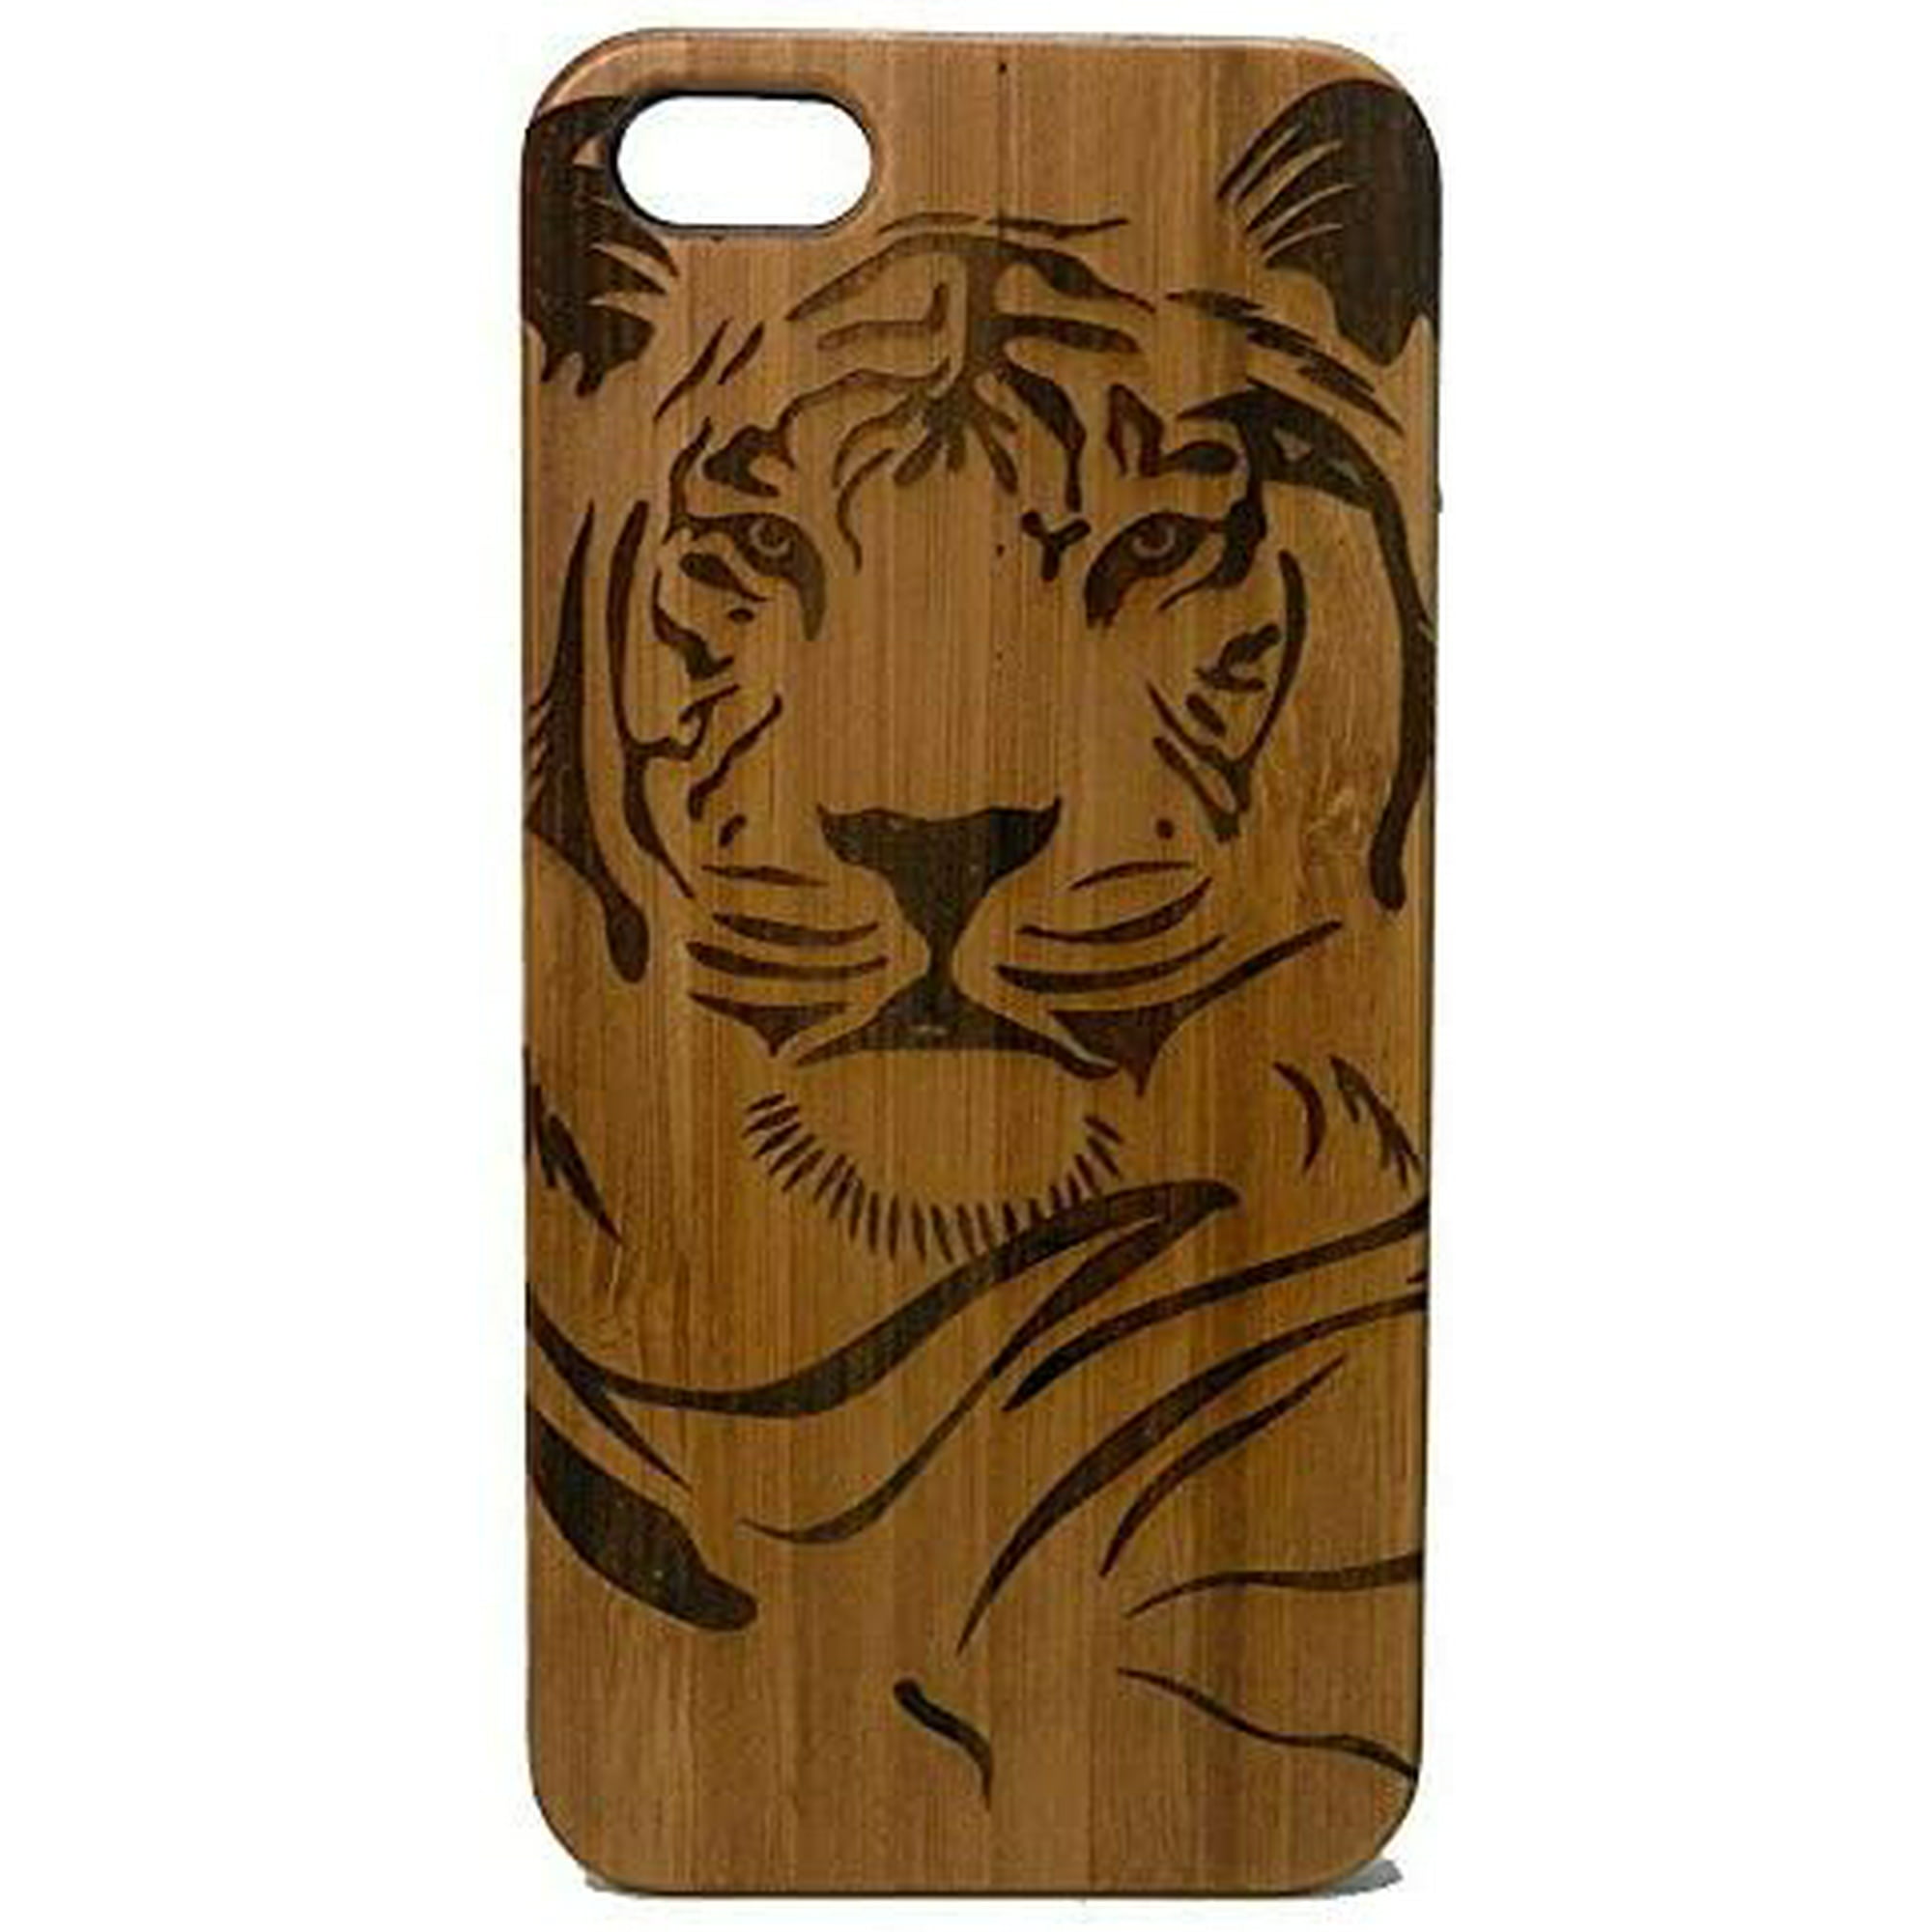 Tiger Case for Tiger Case for iPhone 7 Plus | iMakeTheCase Eco-Friendly  Bamboo Wood Cover | Big Cat Jungle Stripes Spirit Animal | Walmart Canada